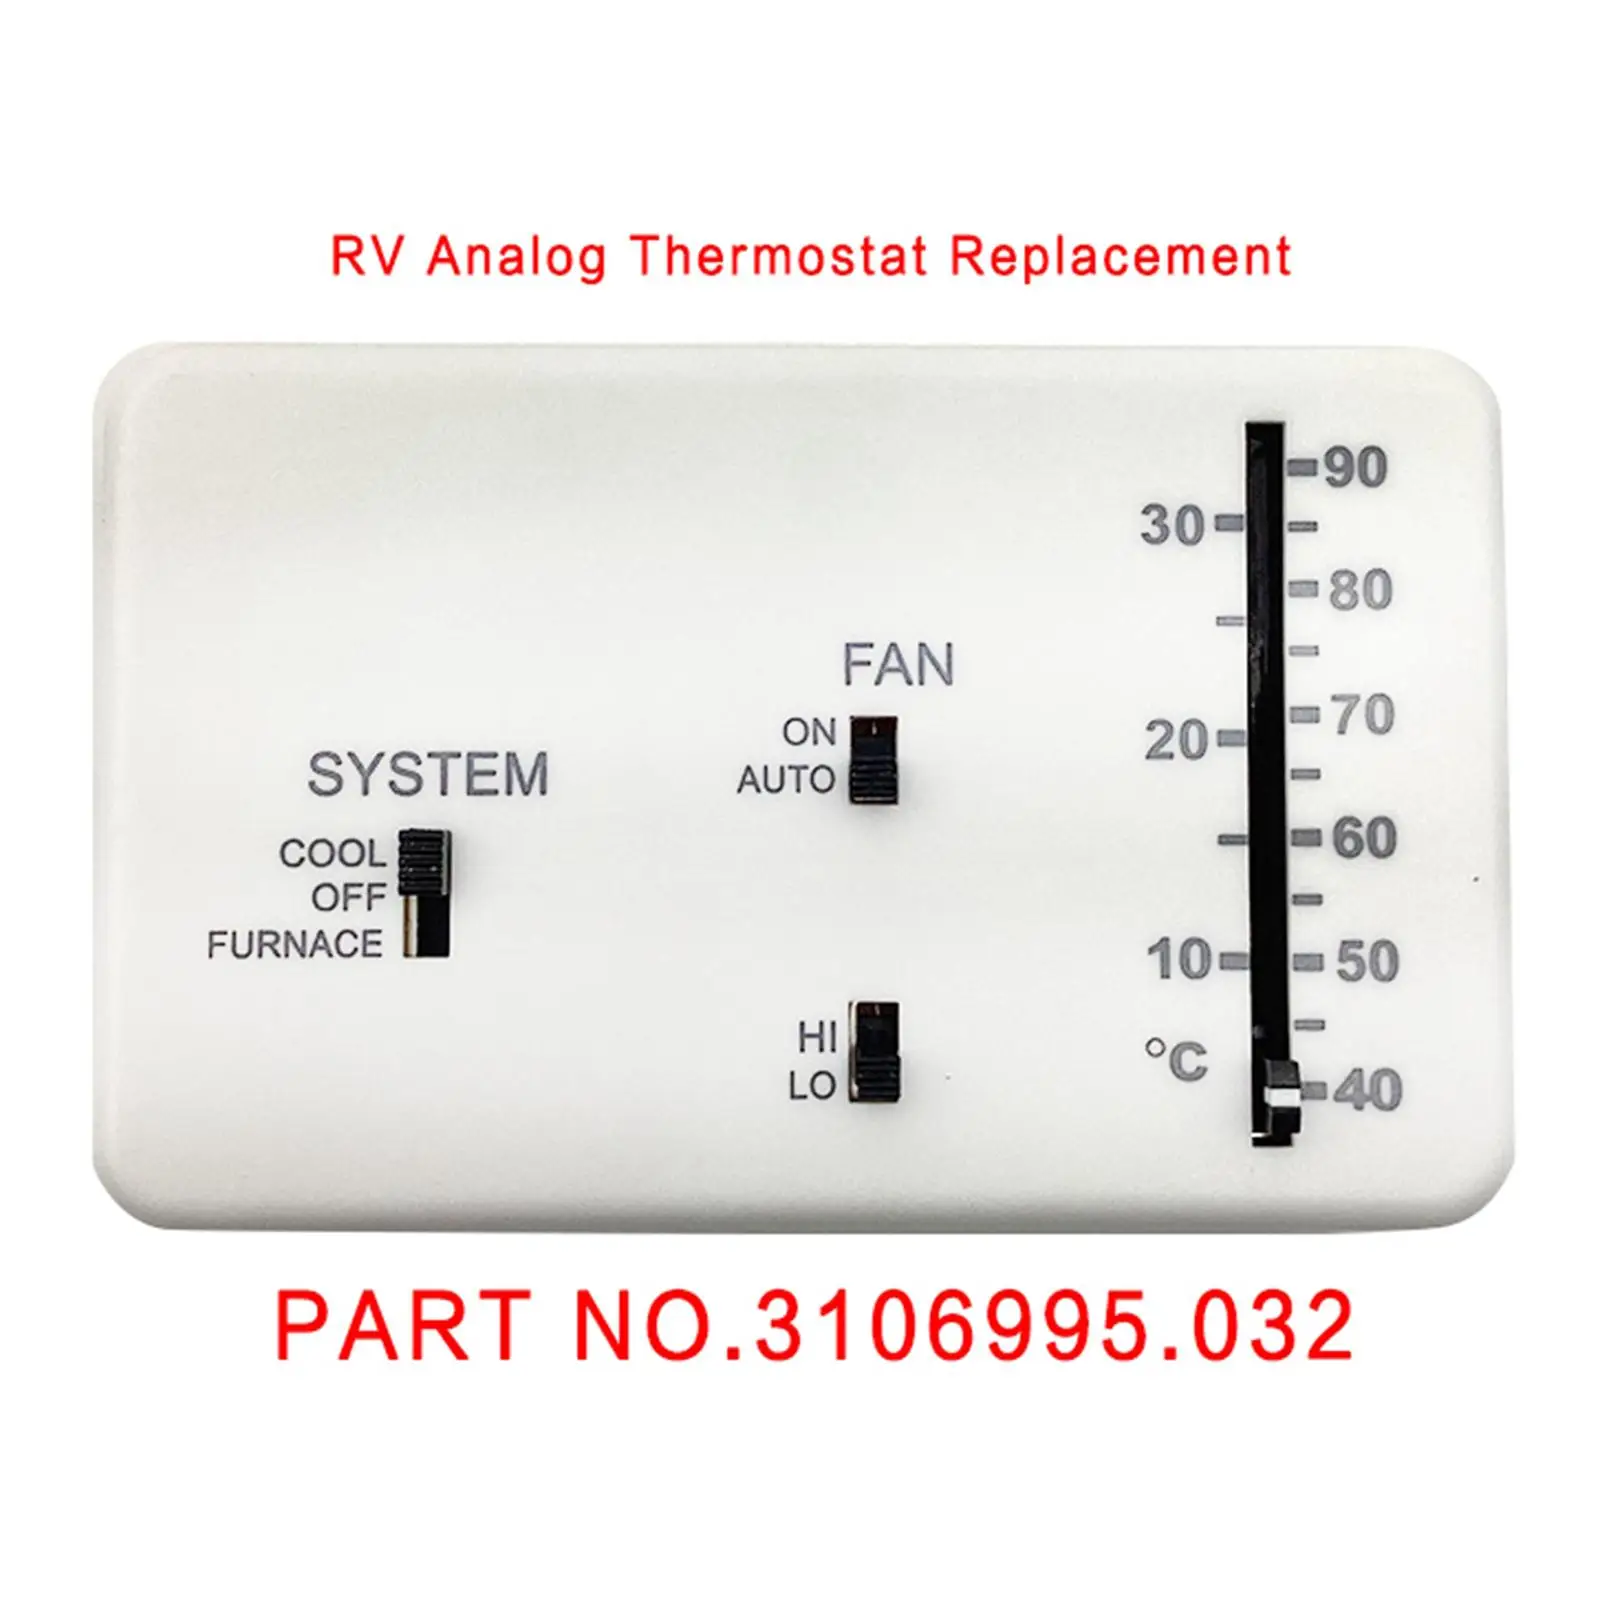 RV Thermostat Replacement white Solid Shell Cool/furnace/Fan/Off for Dometic